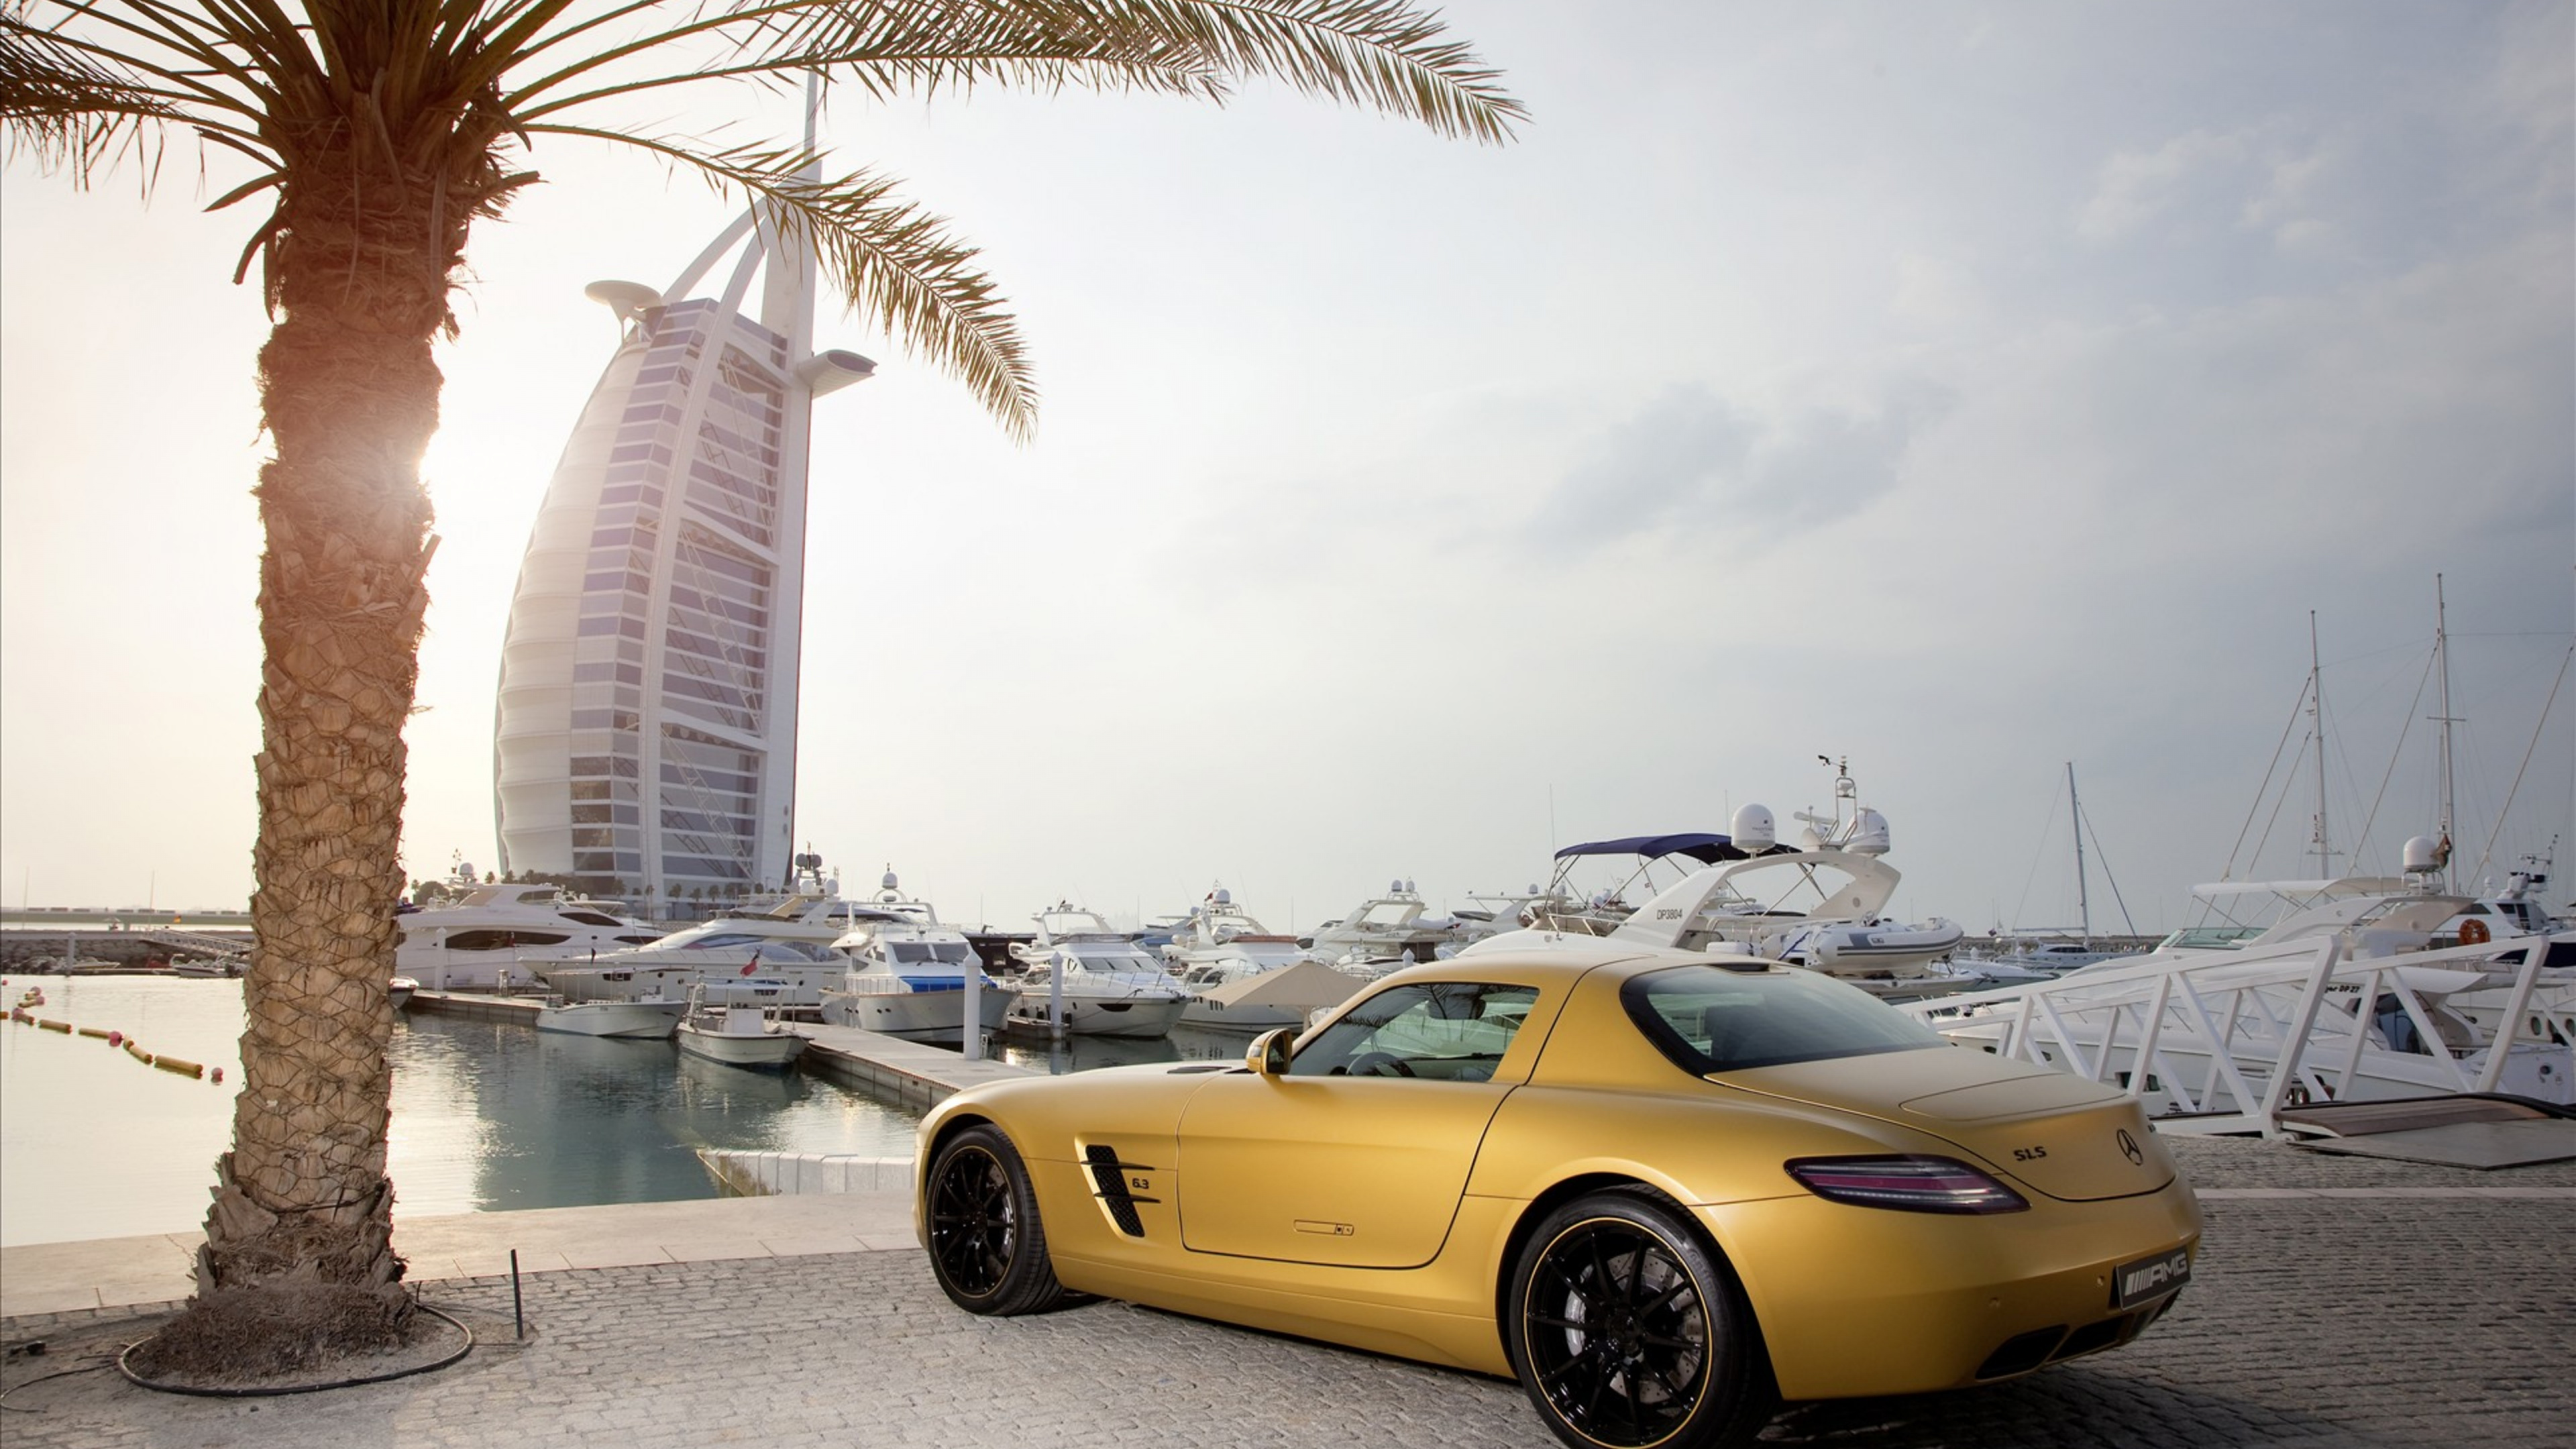 Yellow Porsche 911 Parked Near Palm Trees and Buildings During Daytime. Wallpaper in 3840x2160 Resolution